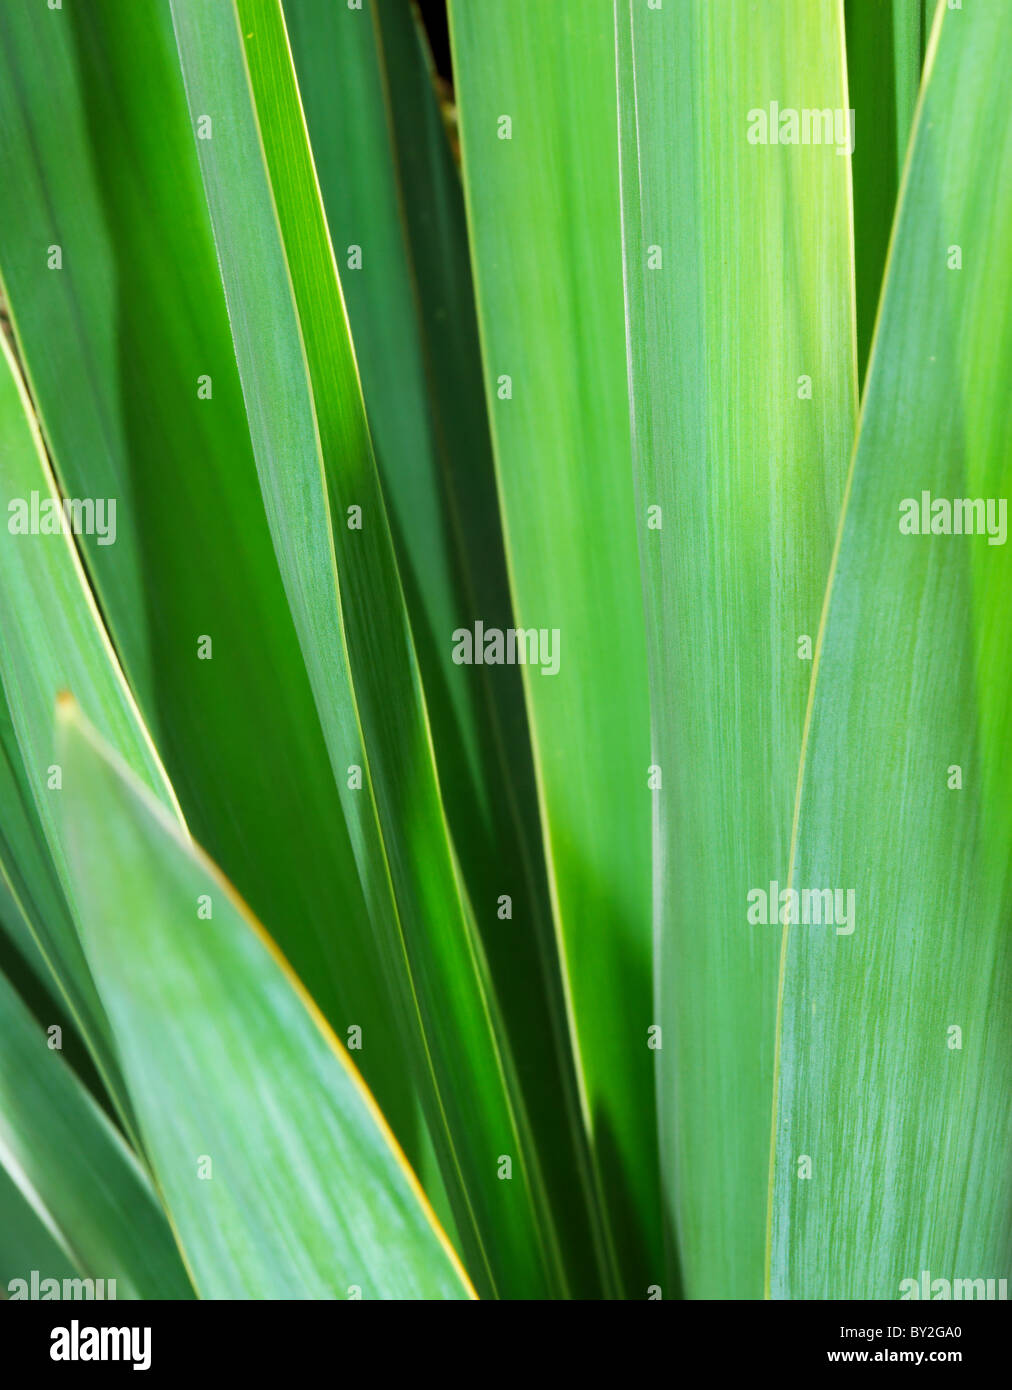 Fresh green yucca leaves (selective focus) Stock Photo